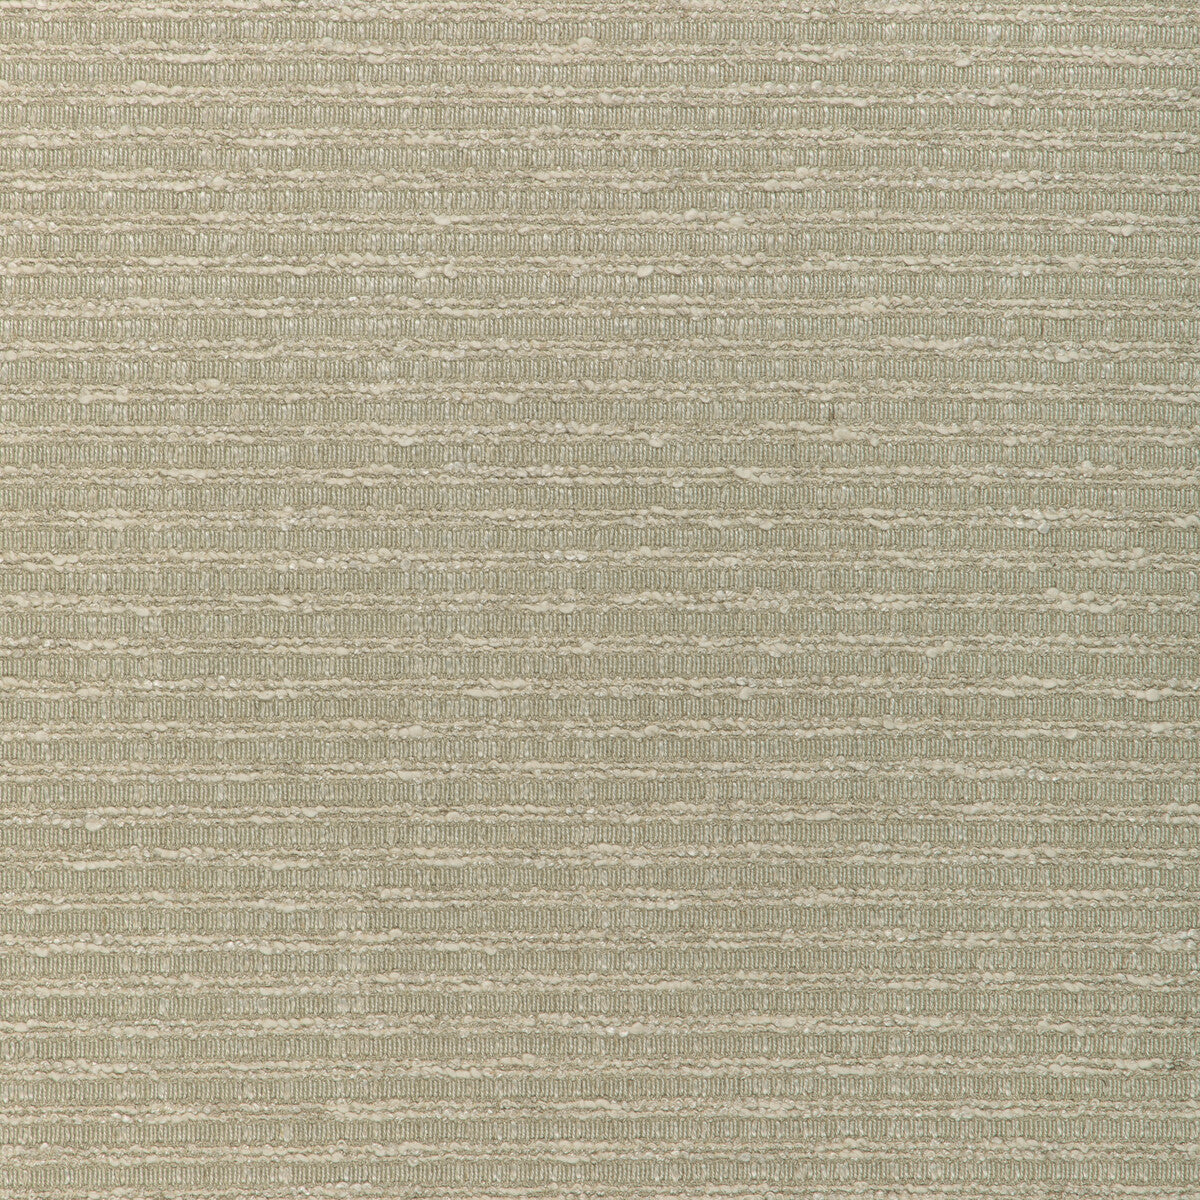 Plushy Stripe fabric in linen color - pattern 36859.16.0 - by Kravet Couture in the Atelier Weaves collection